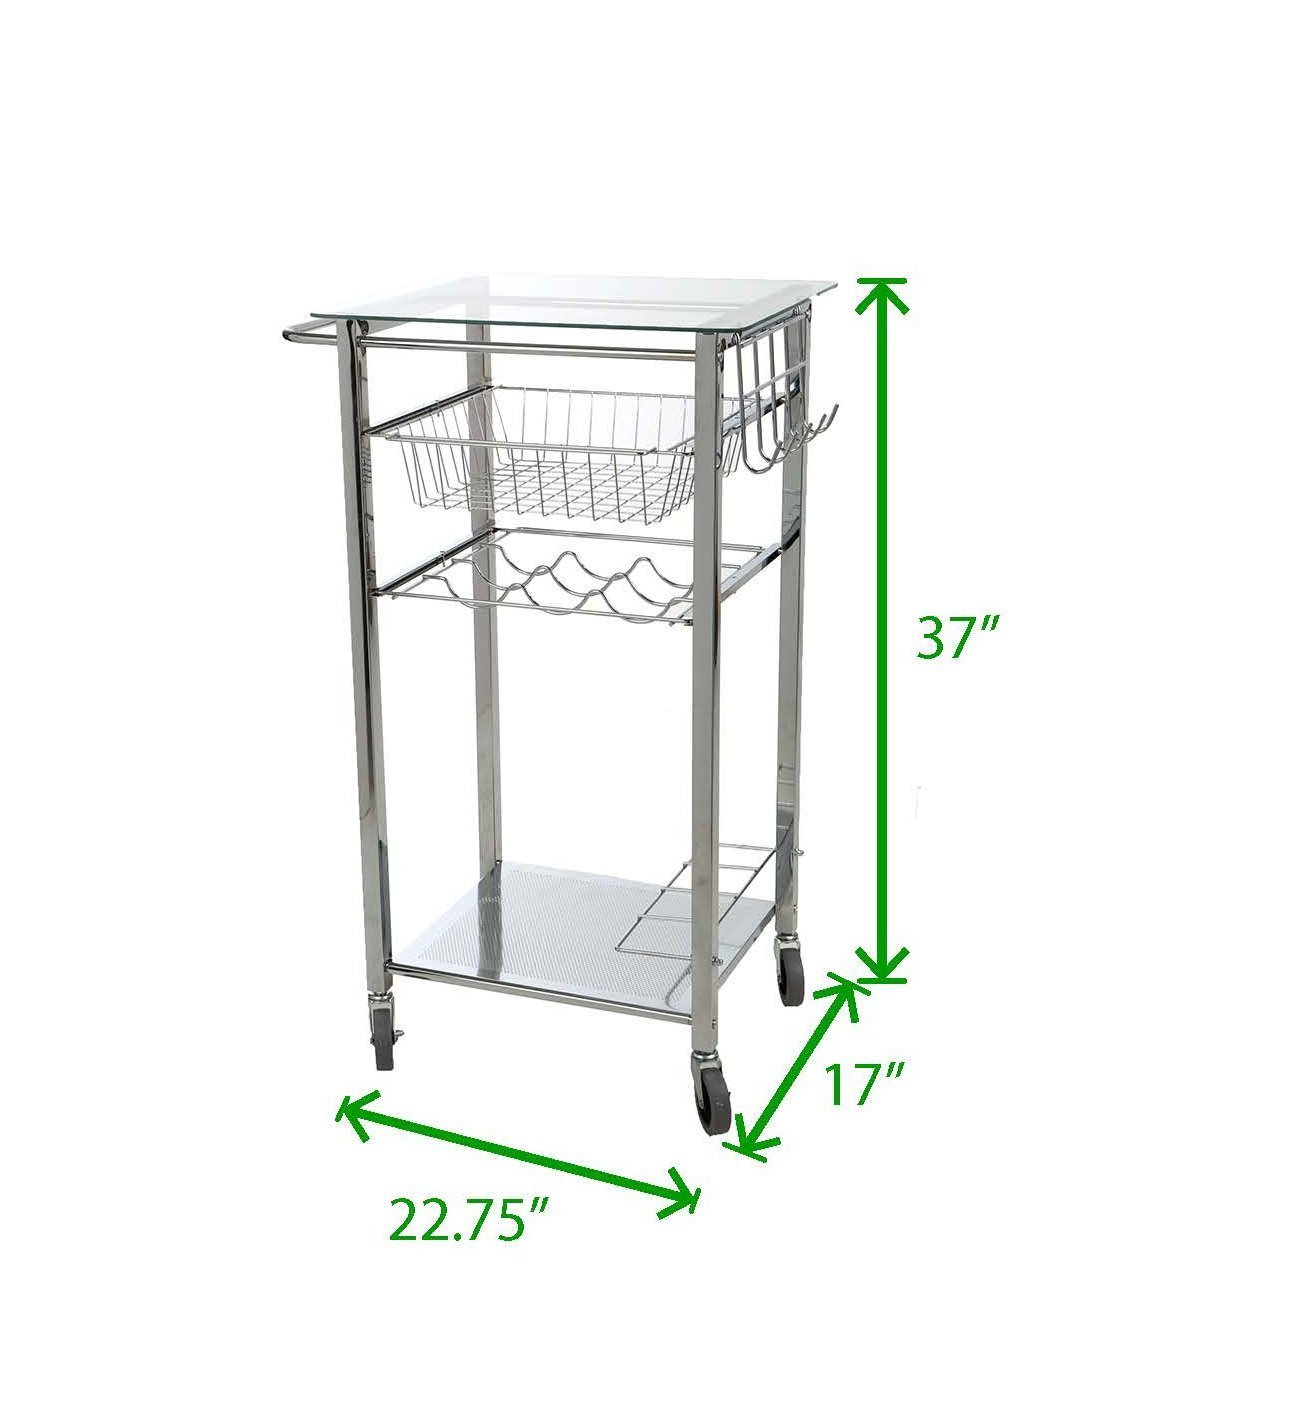 Online shopping mind reader glass top mobile kitchen cart with wine bottle holder wine rack towel holder perfect kitchen island for cooking utensils kitchen appliances and food storage silver